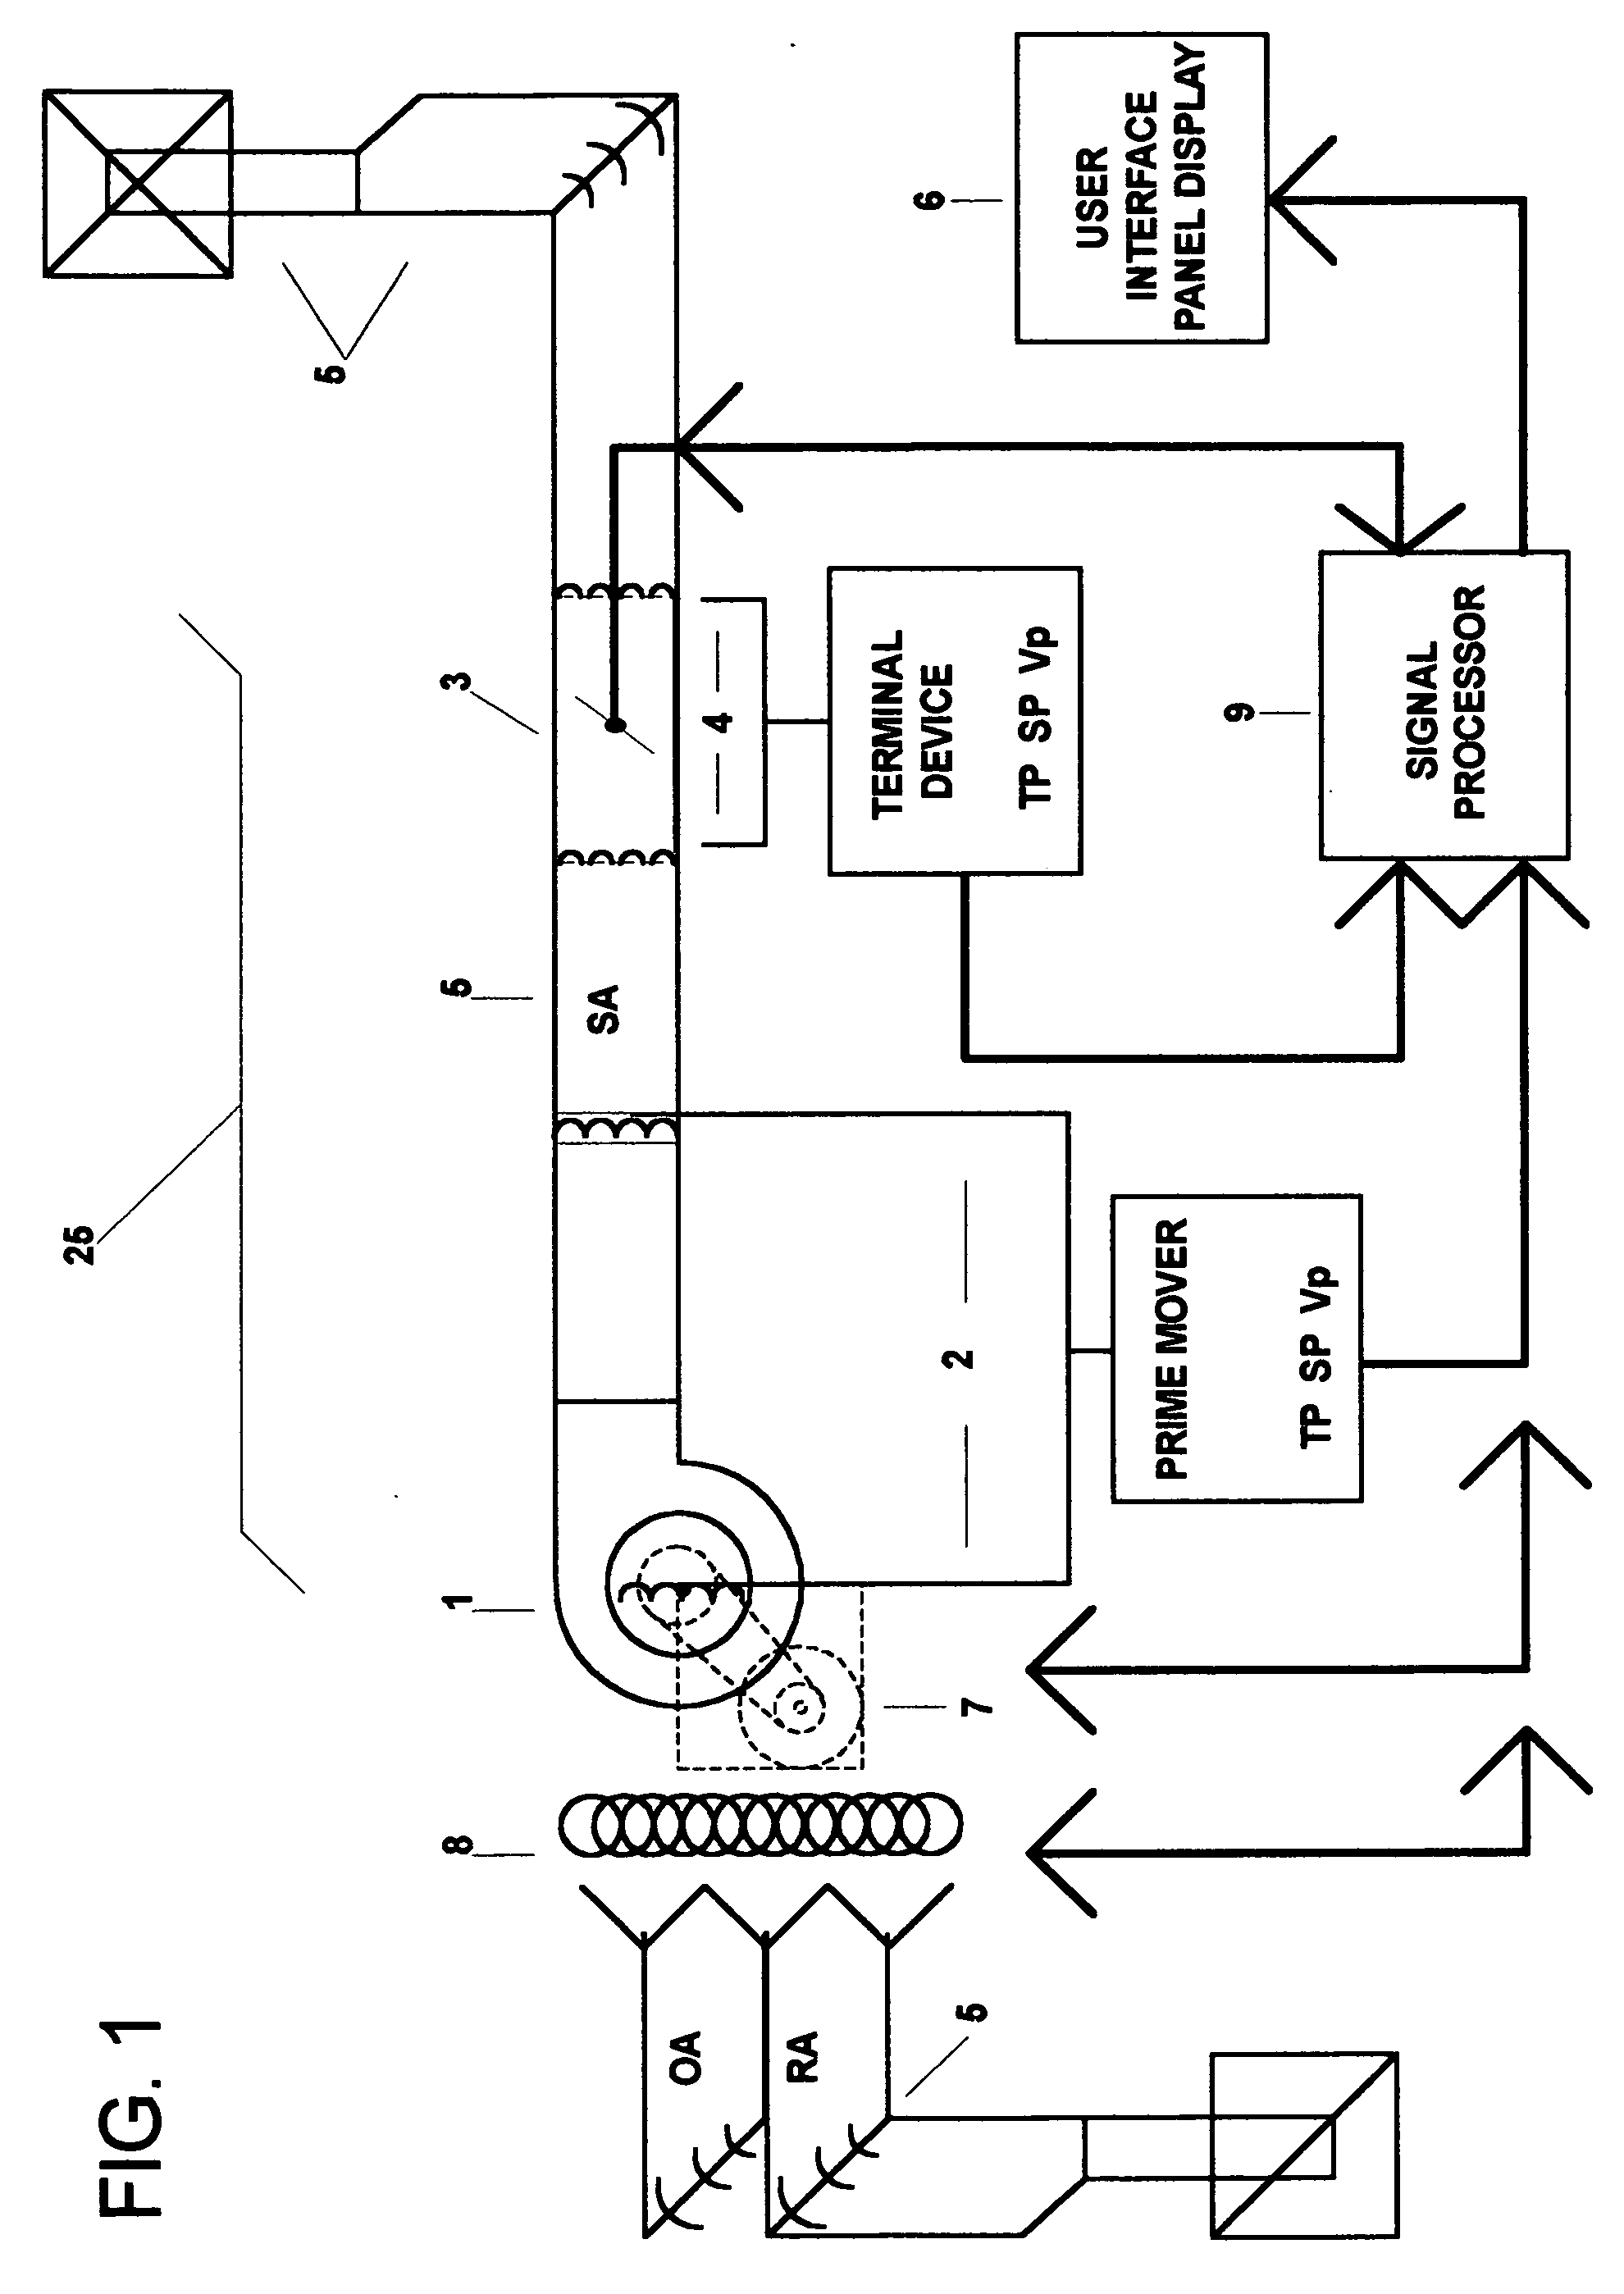 Fully articulated and comprehensive air and fluid distribution, metering, and control method and apparatus for primary movers, heat exchangers, and terminal flow devices